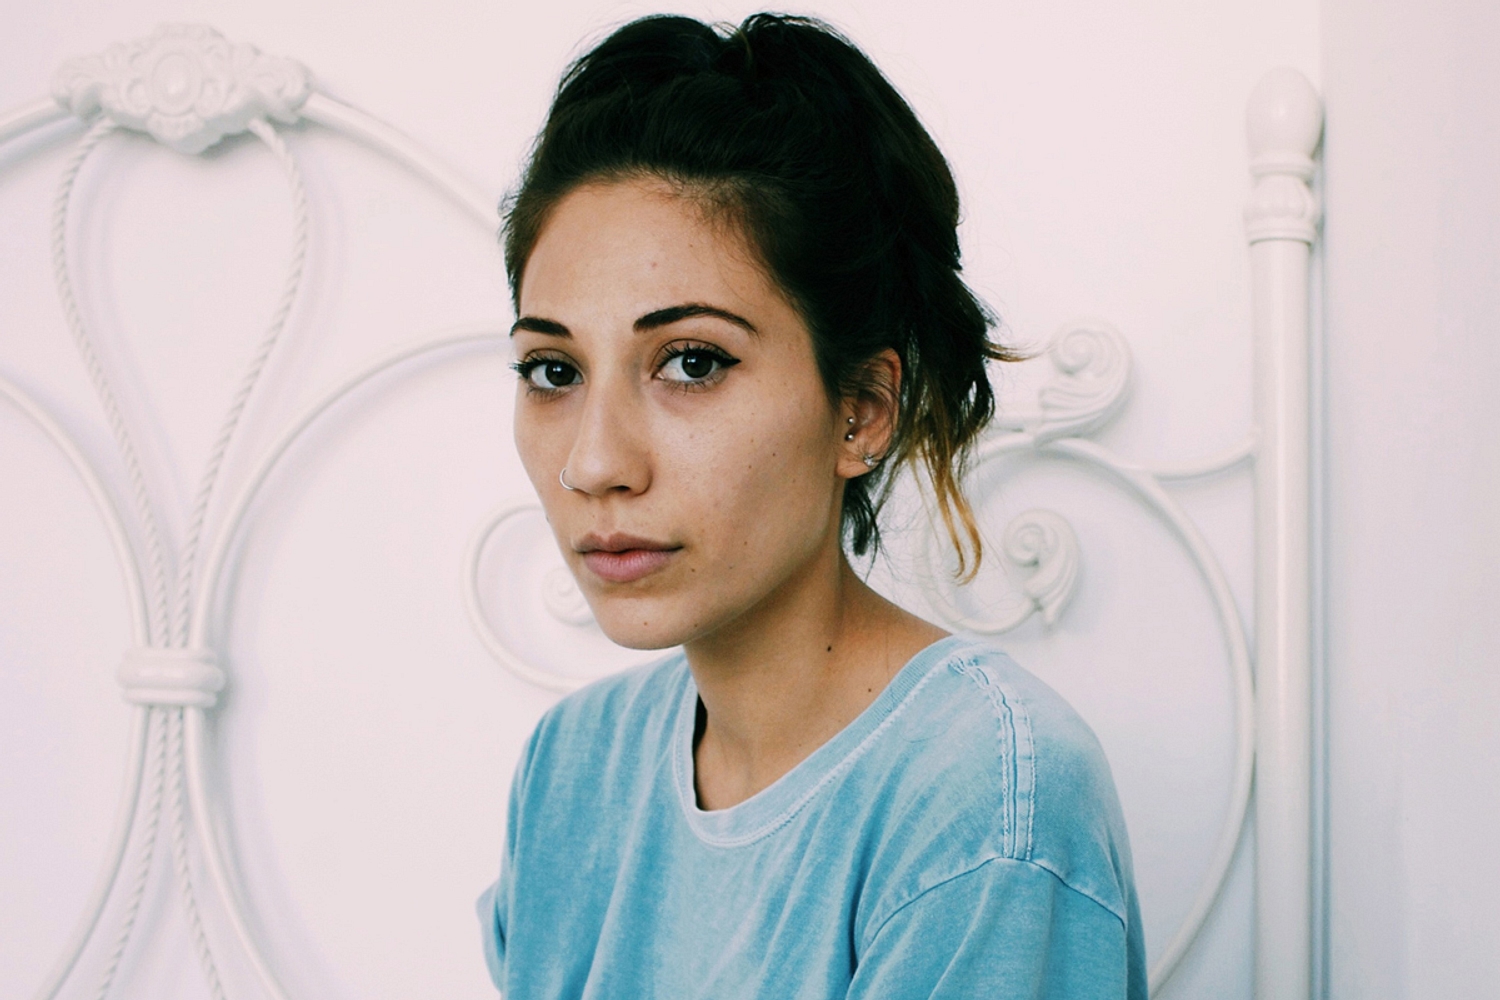 Tei Shi unveils ‘See Me’ single, produced by Glass Animals’ Dave Bayley